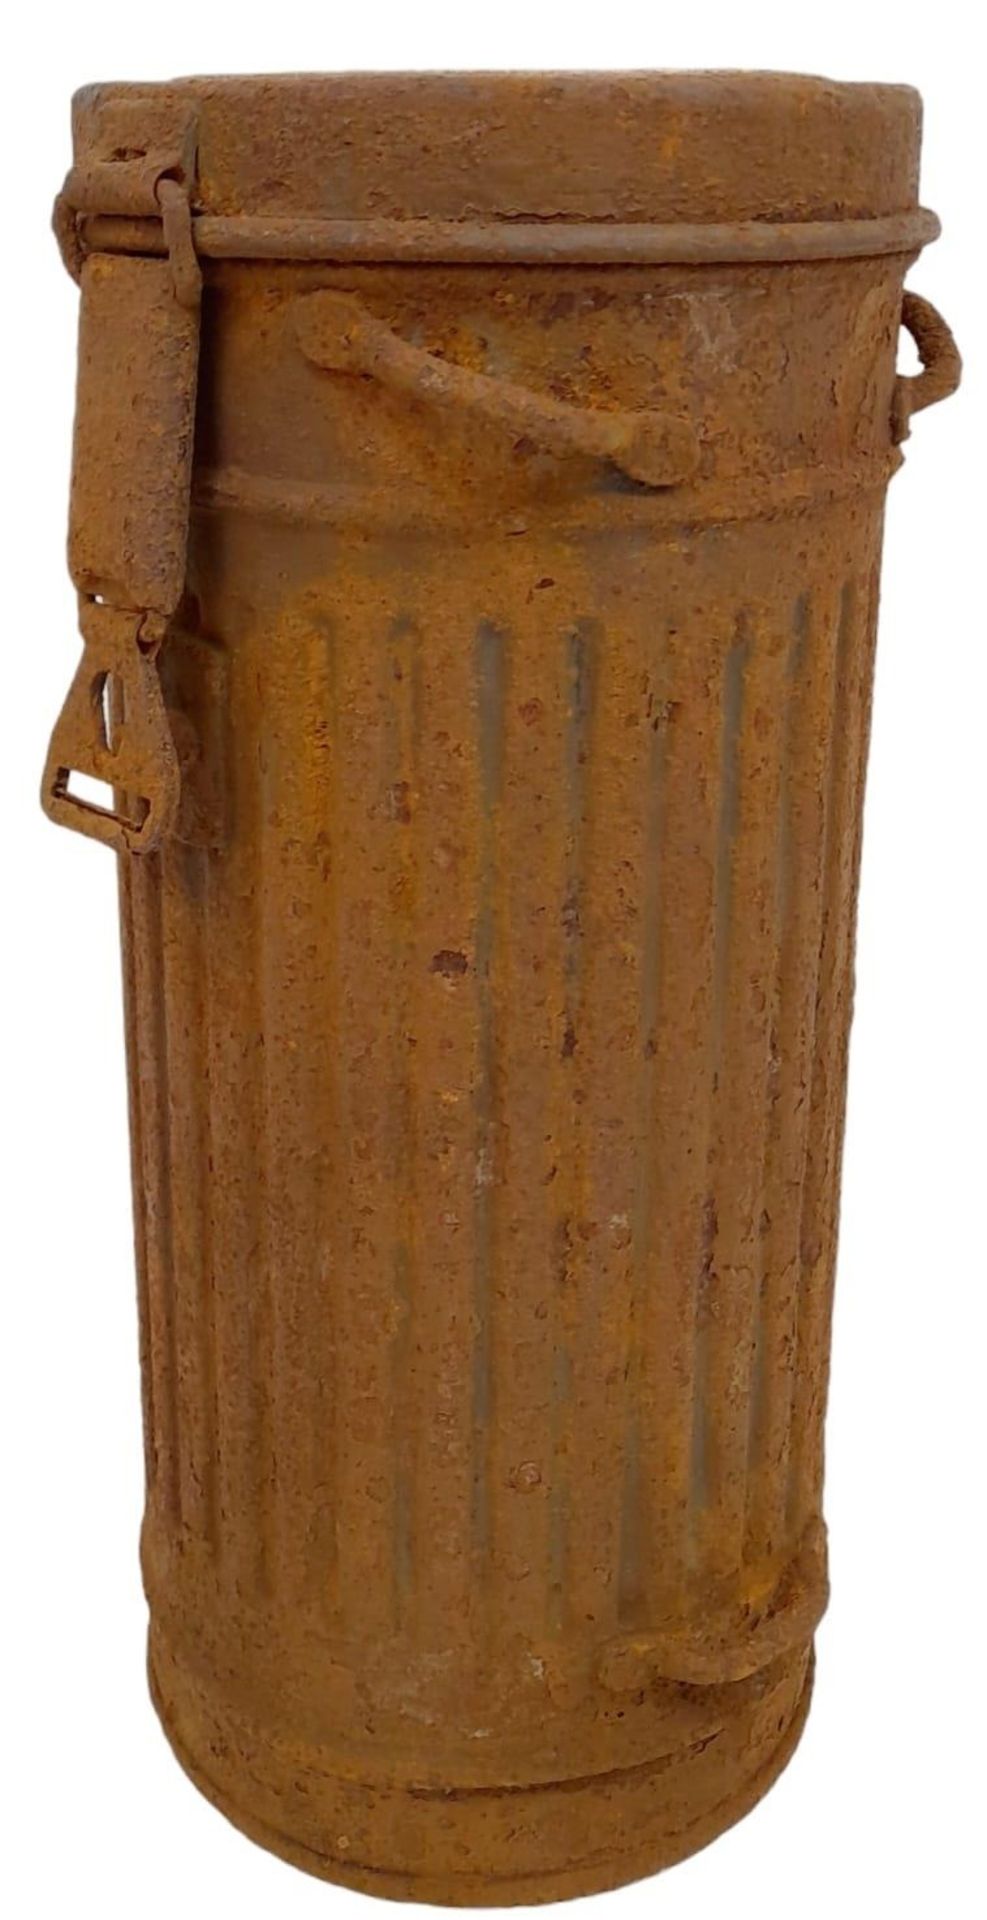 Semi Relic WW2 German Medics Gas Mask Canister. With remains of Normandy Camouflage - Image 2 of 9